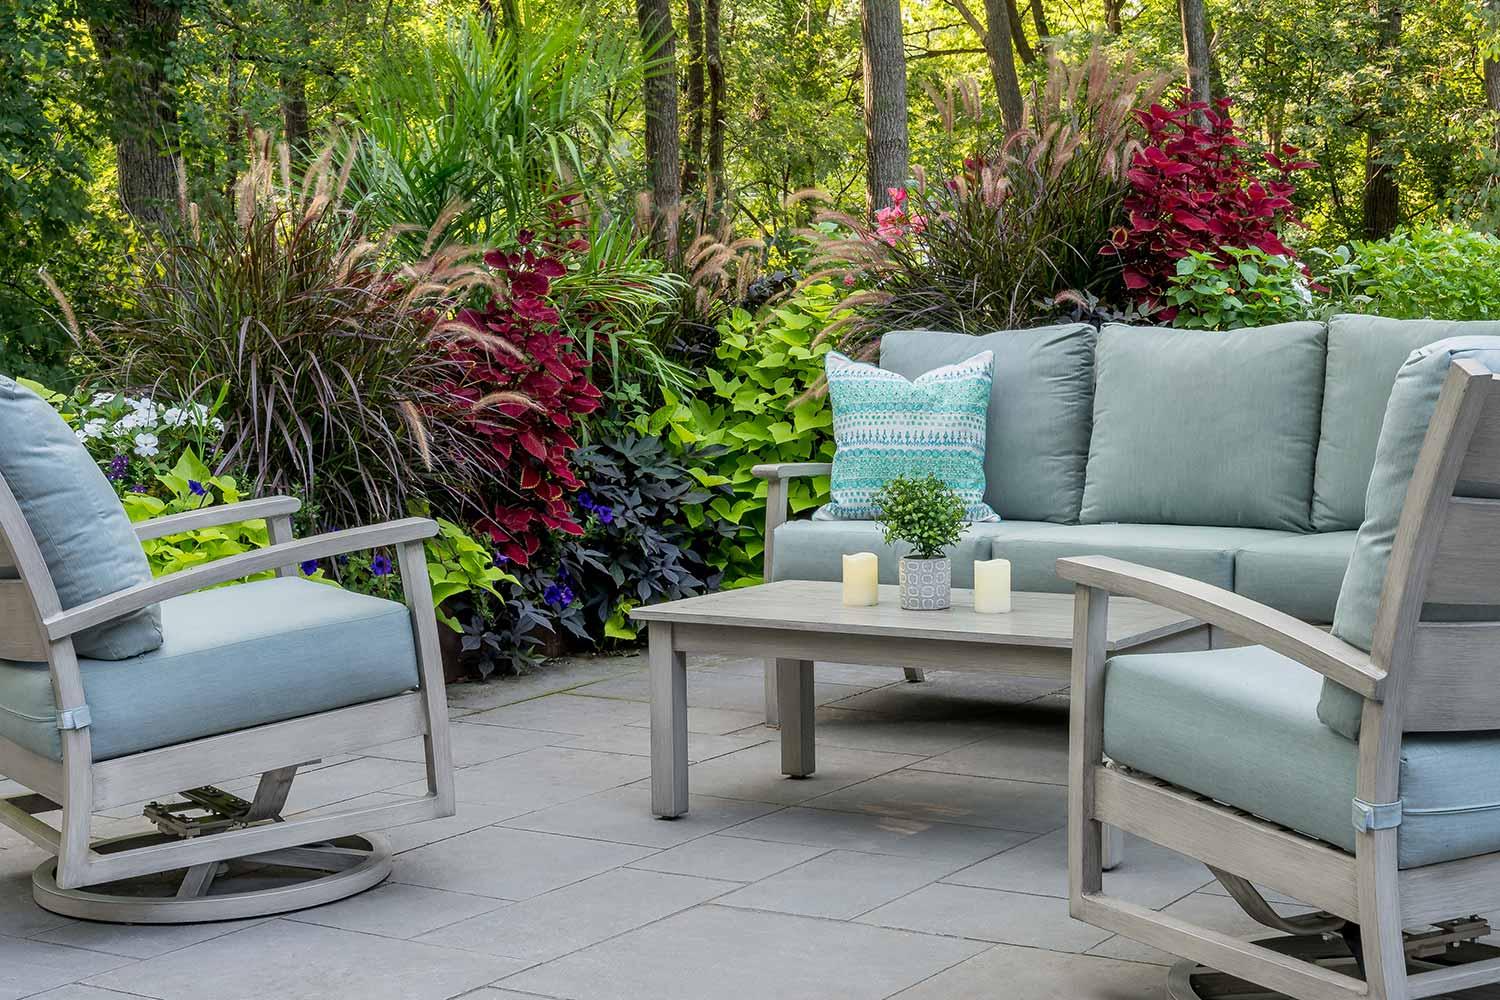 Seating patio with teeming garden